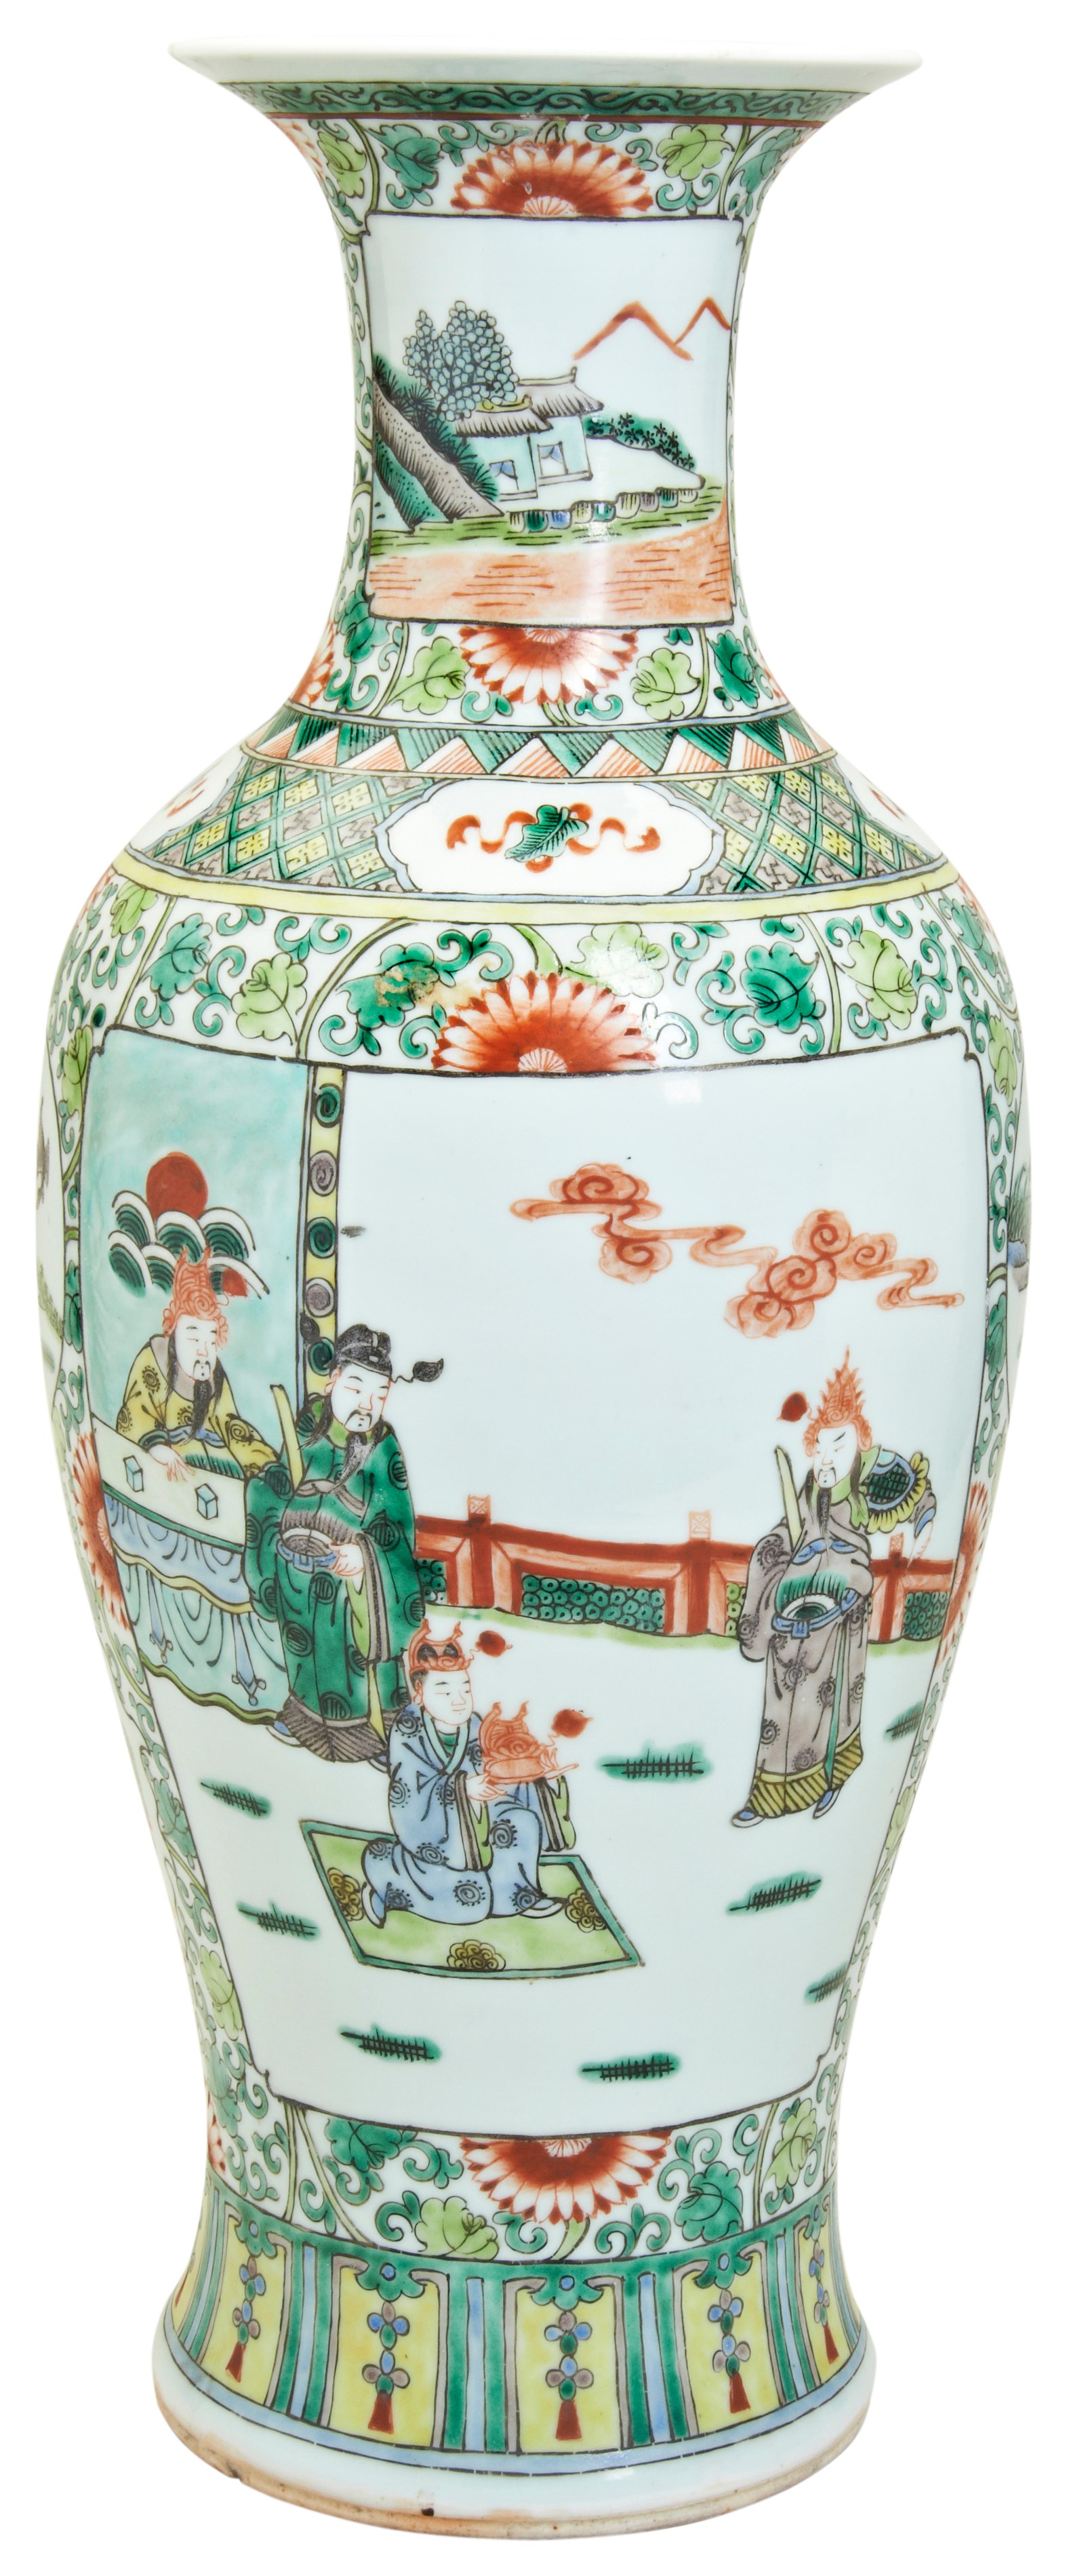 A LARGE FAMILLE VERTE BALUSTER VASE 19TH / 20TH CENTURY in the Kangxi style 59cm high - Image 2 of 2